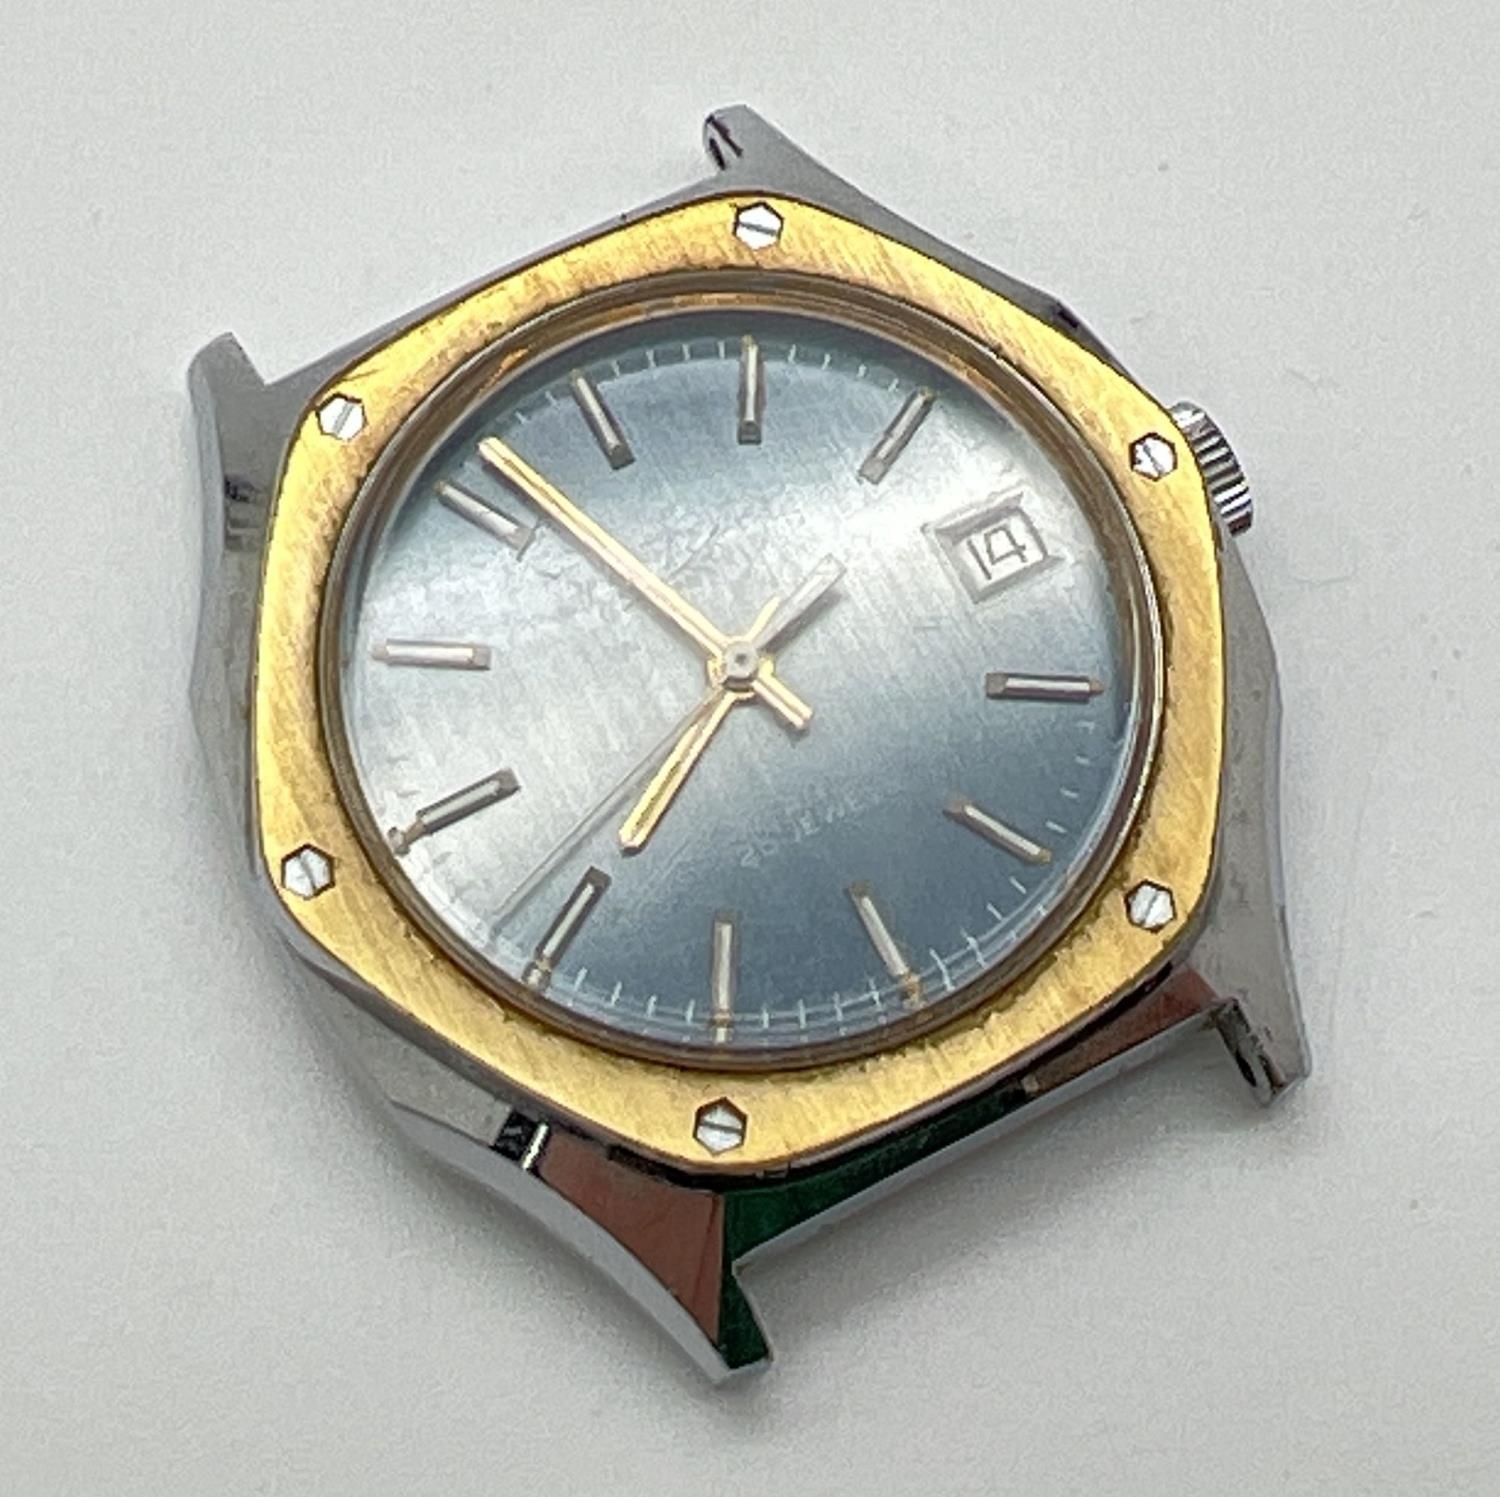 A vintage J.W. Benson men's automatic wristwatch without strap. Hexagon shaped stainless steel